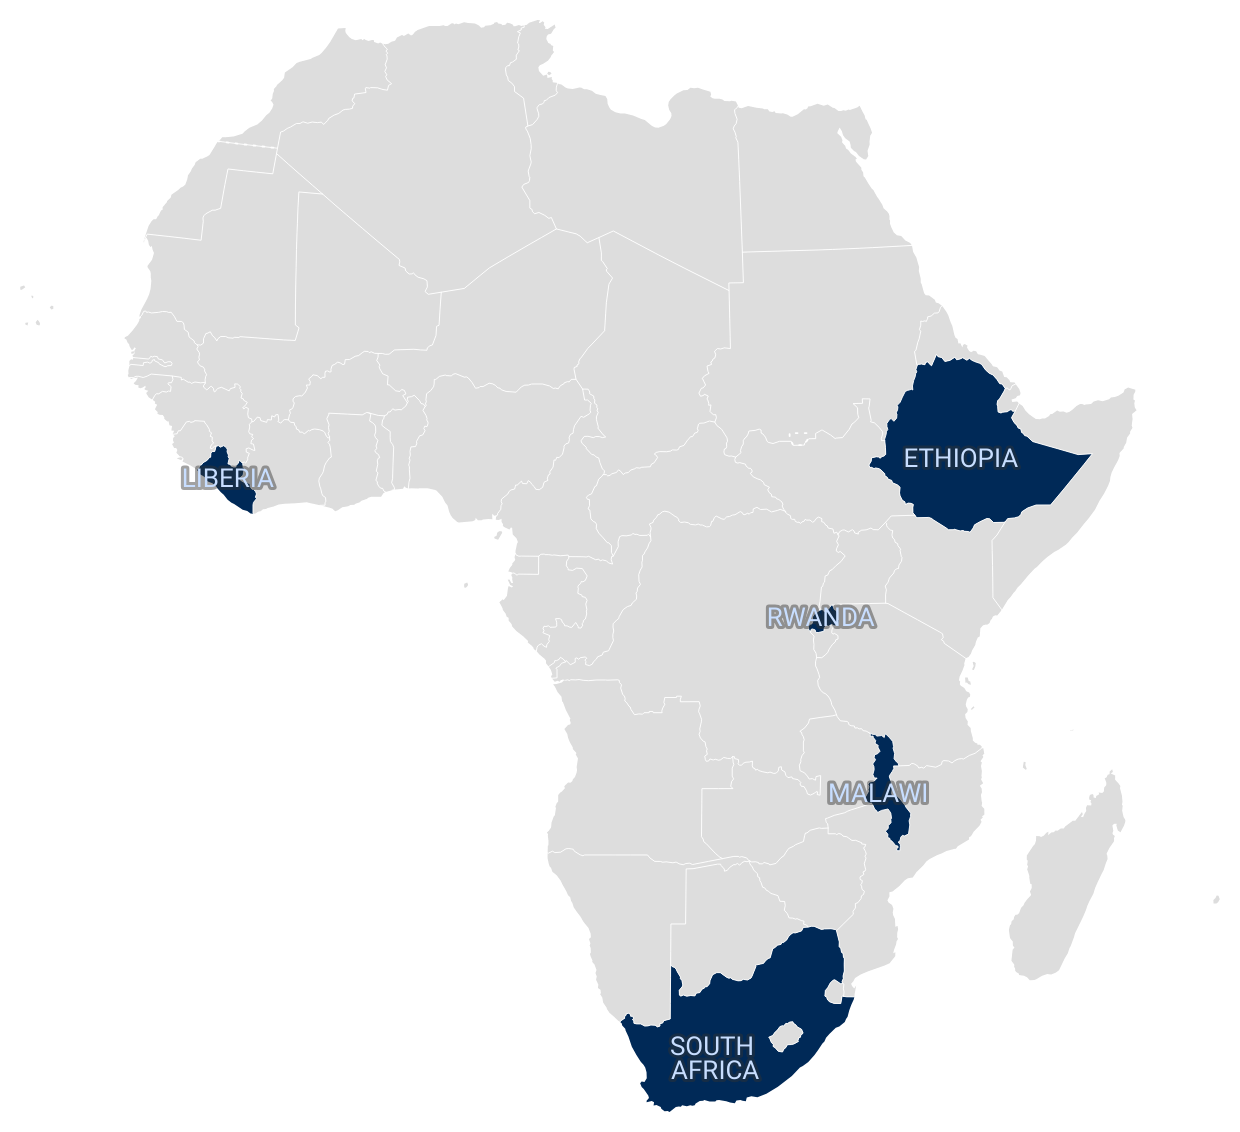 Map of Africa with Member Countries highlighted and labeled.